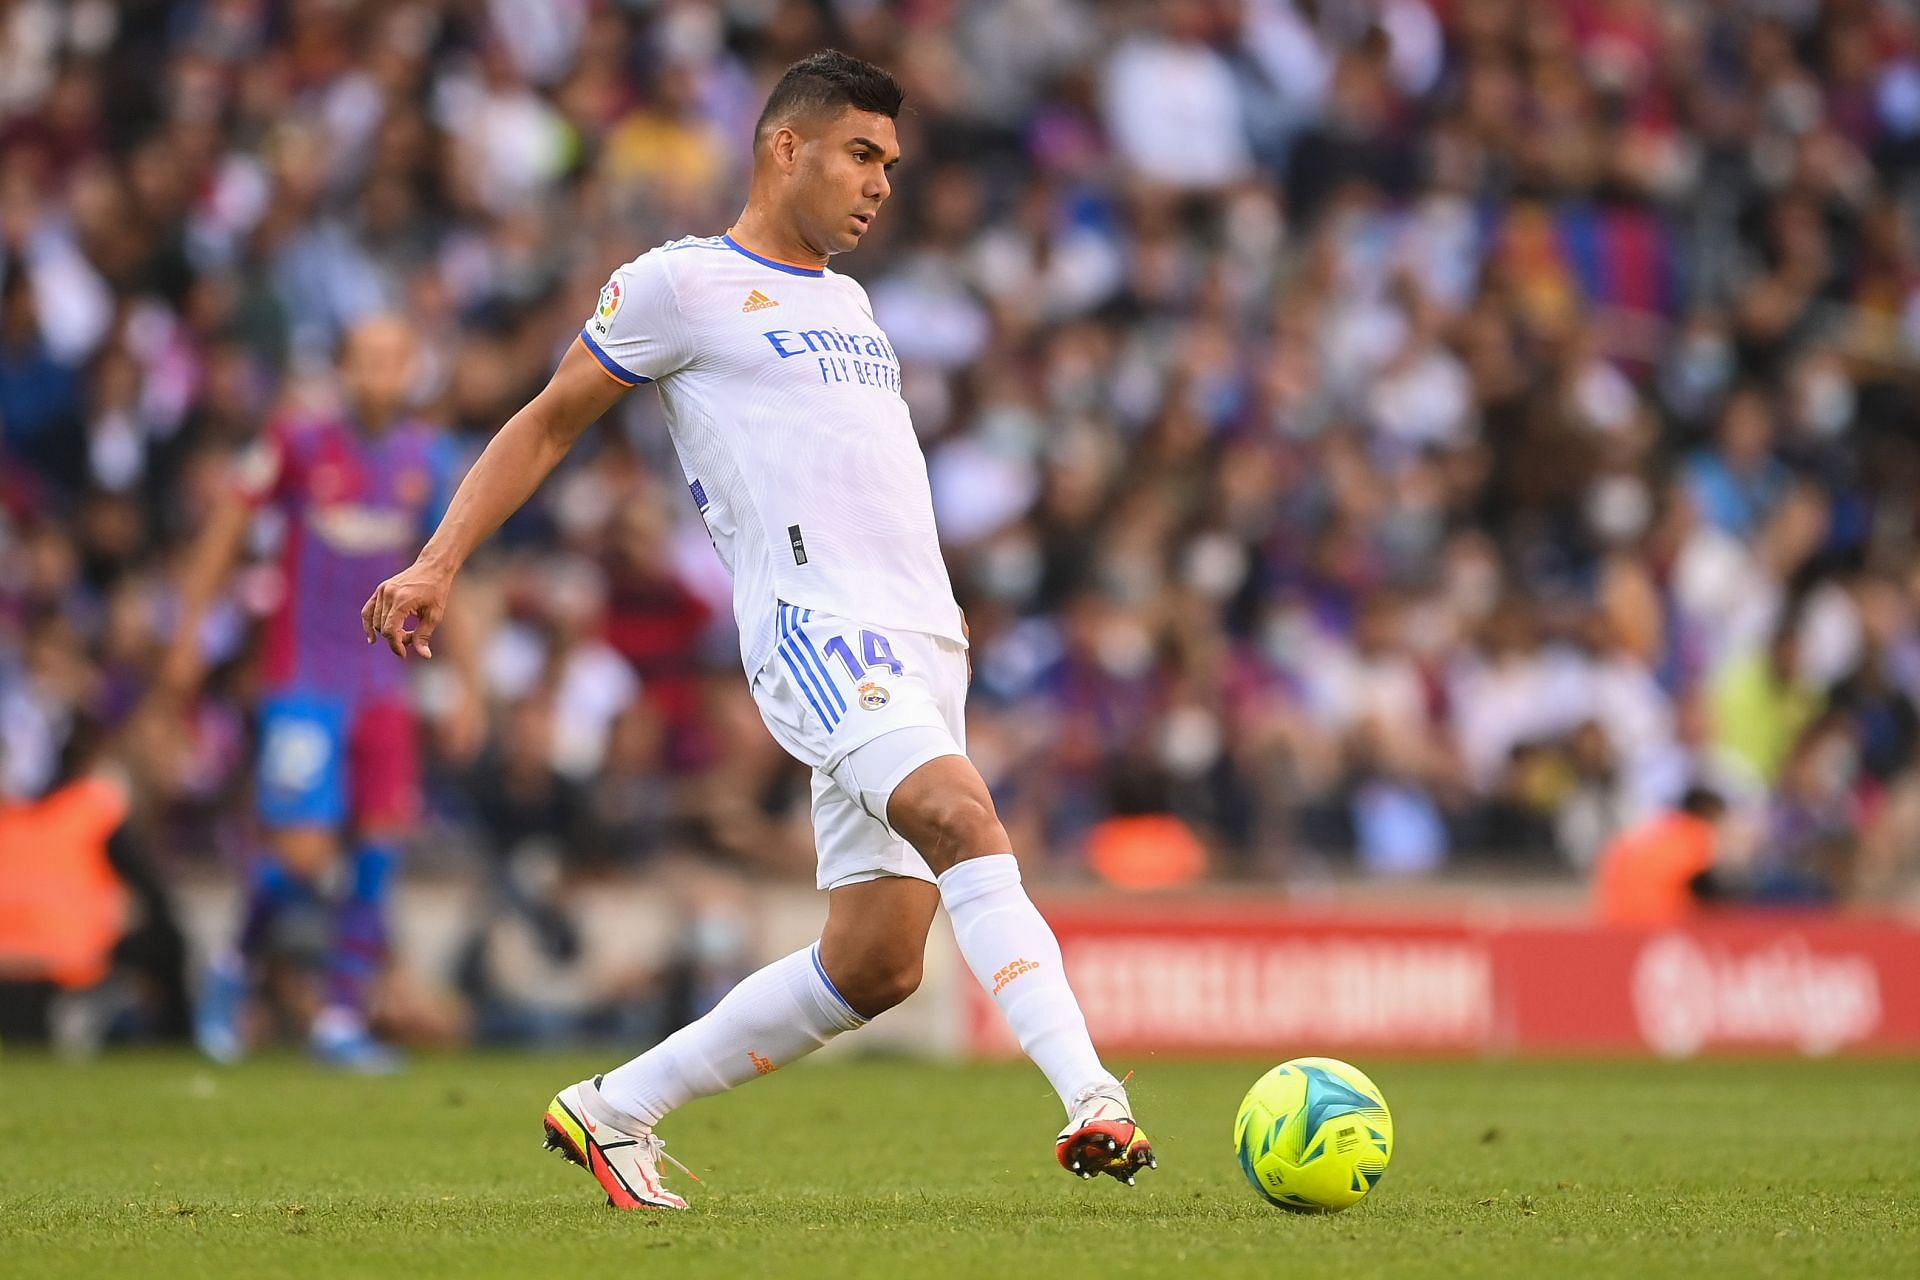 The Red Devils can benefit from leadership form Casemiro